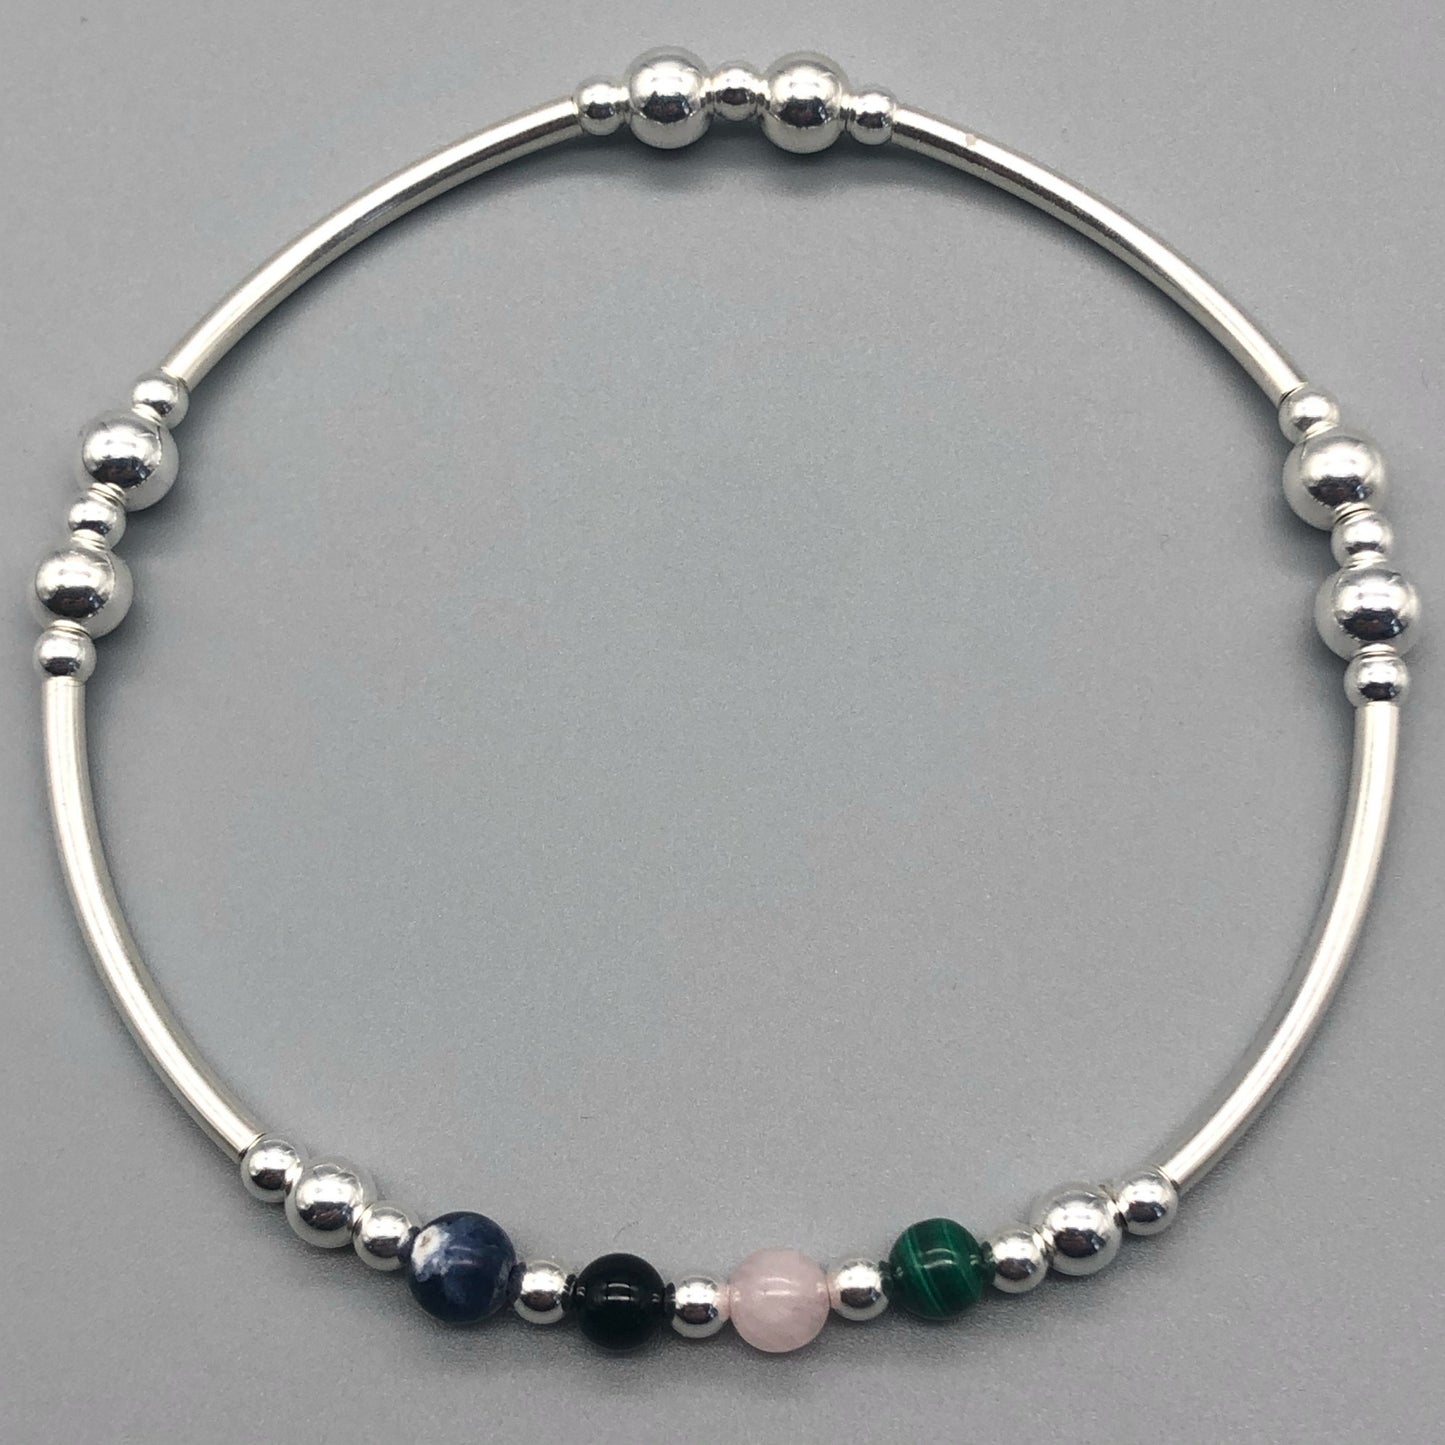 Anxiety support healing crystal sterling silver women's stacking charm bracelet